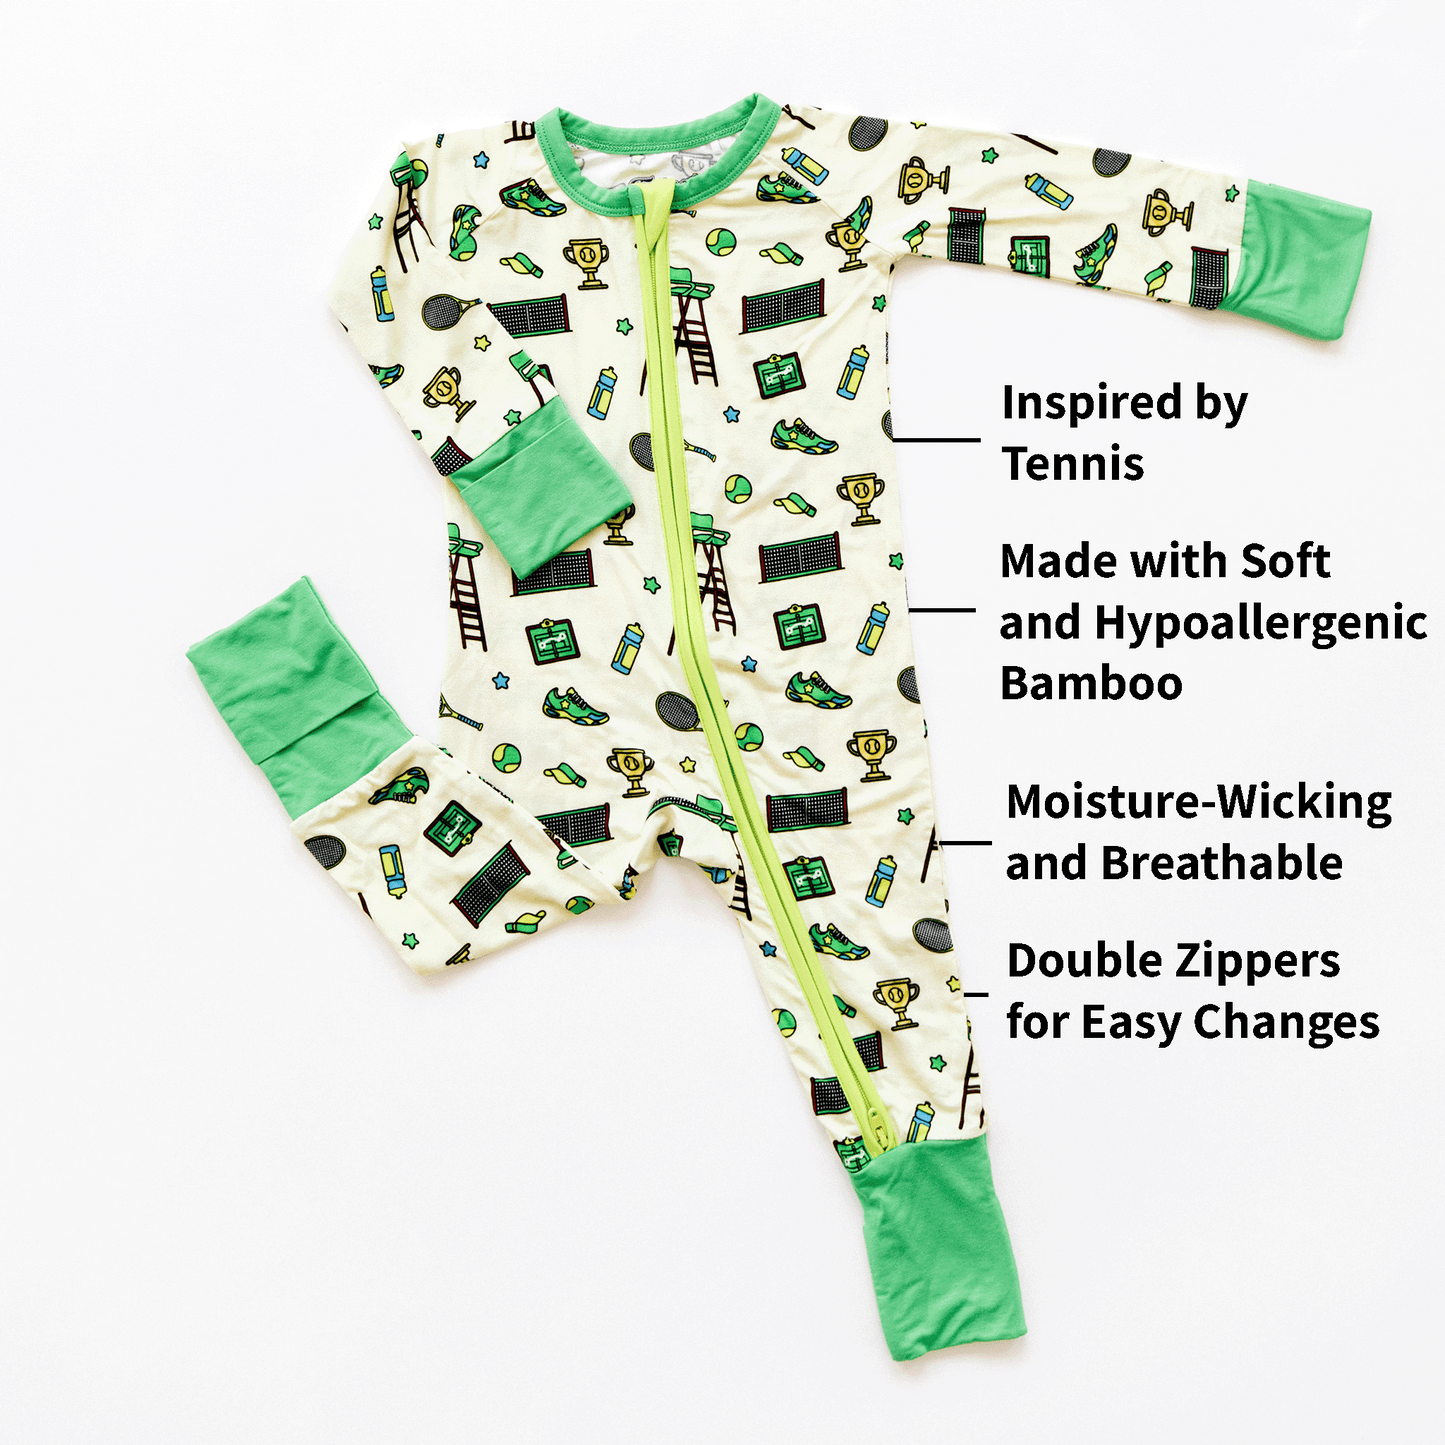 The Tailgate Tikes Tennis Onesie is a charming white baby onesie with green cuffs that features a playful tennis-themed print. Perfect for your little one, it is highlighted by phrases like "Inspired by Tennis," "Made with Soft and Hypoallergenic Bamboo," "Moisture-Wicking and Breathable," and has "Double Zippers for Easy Changes.